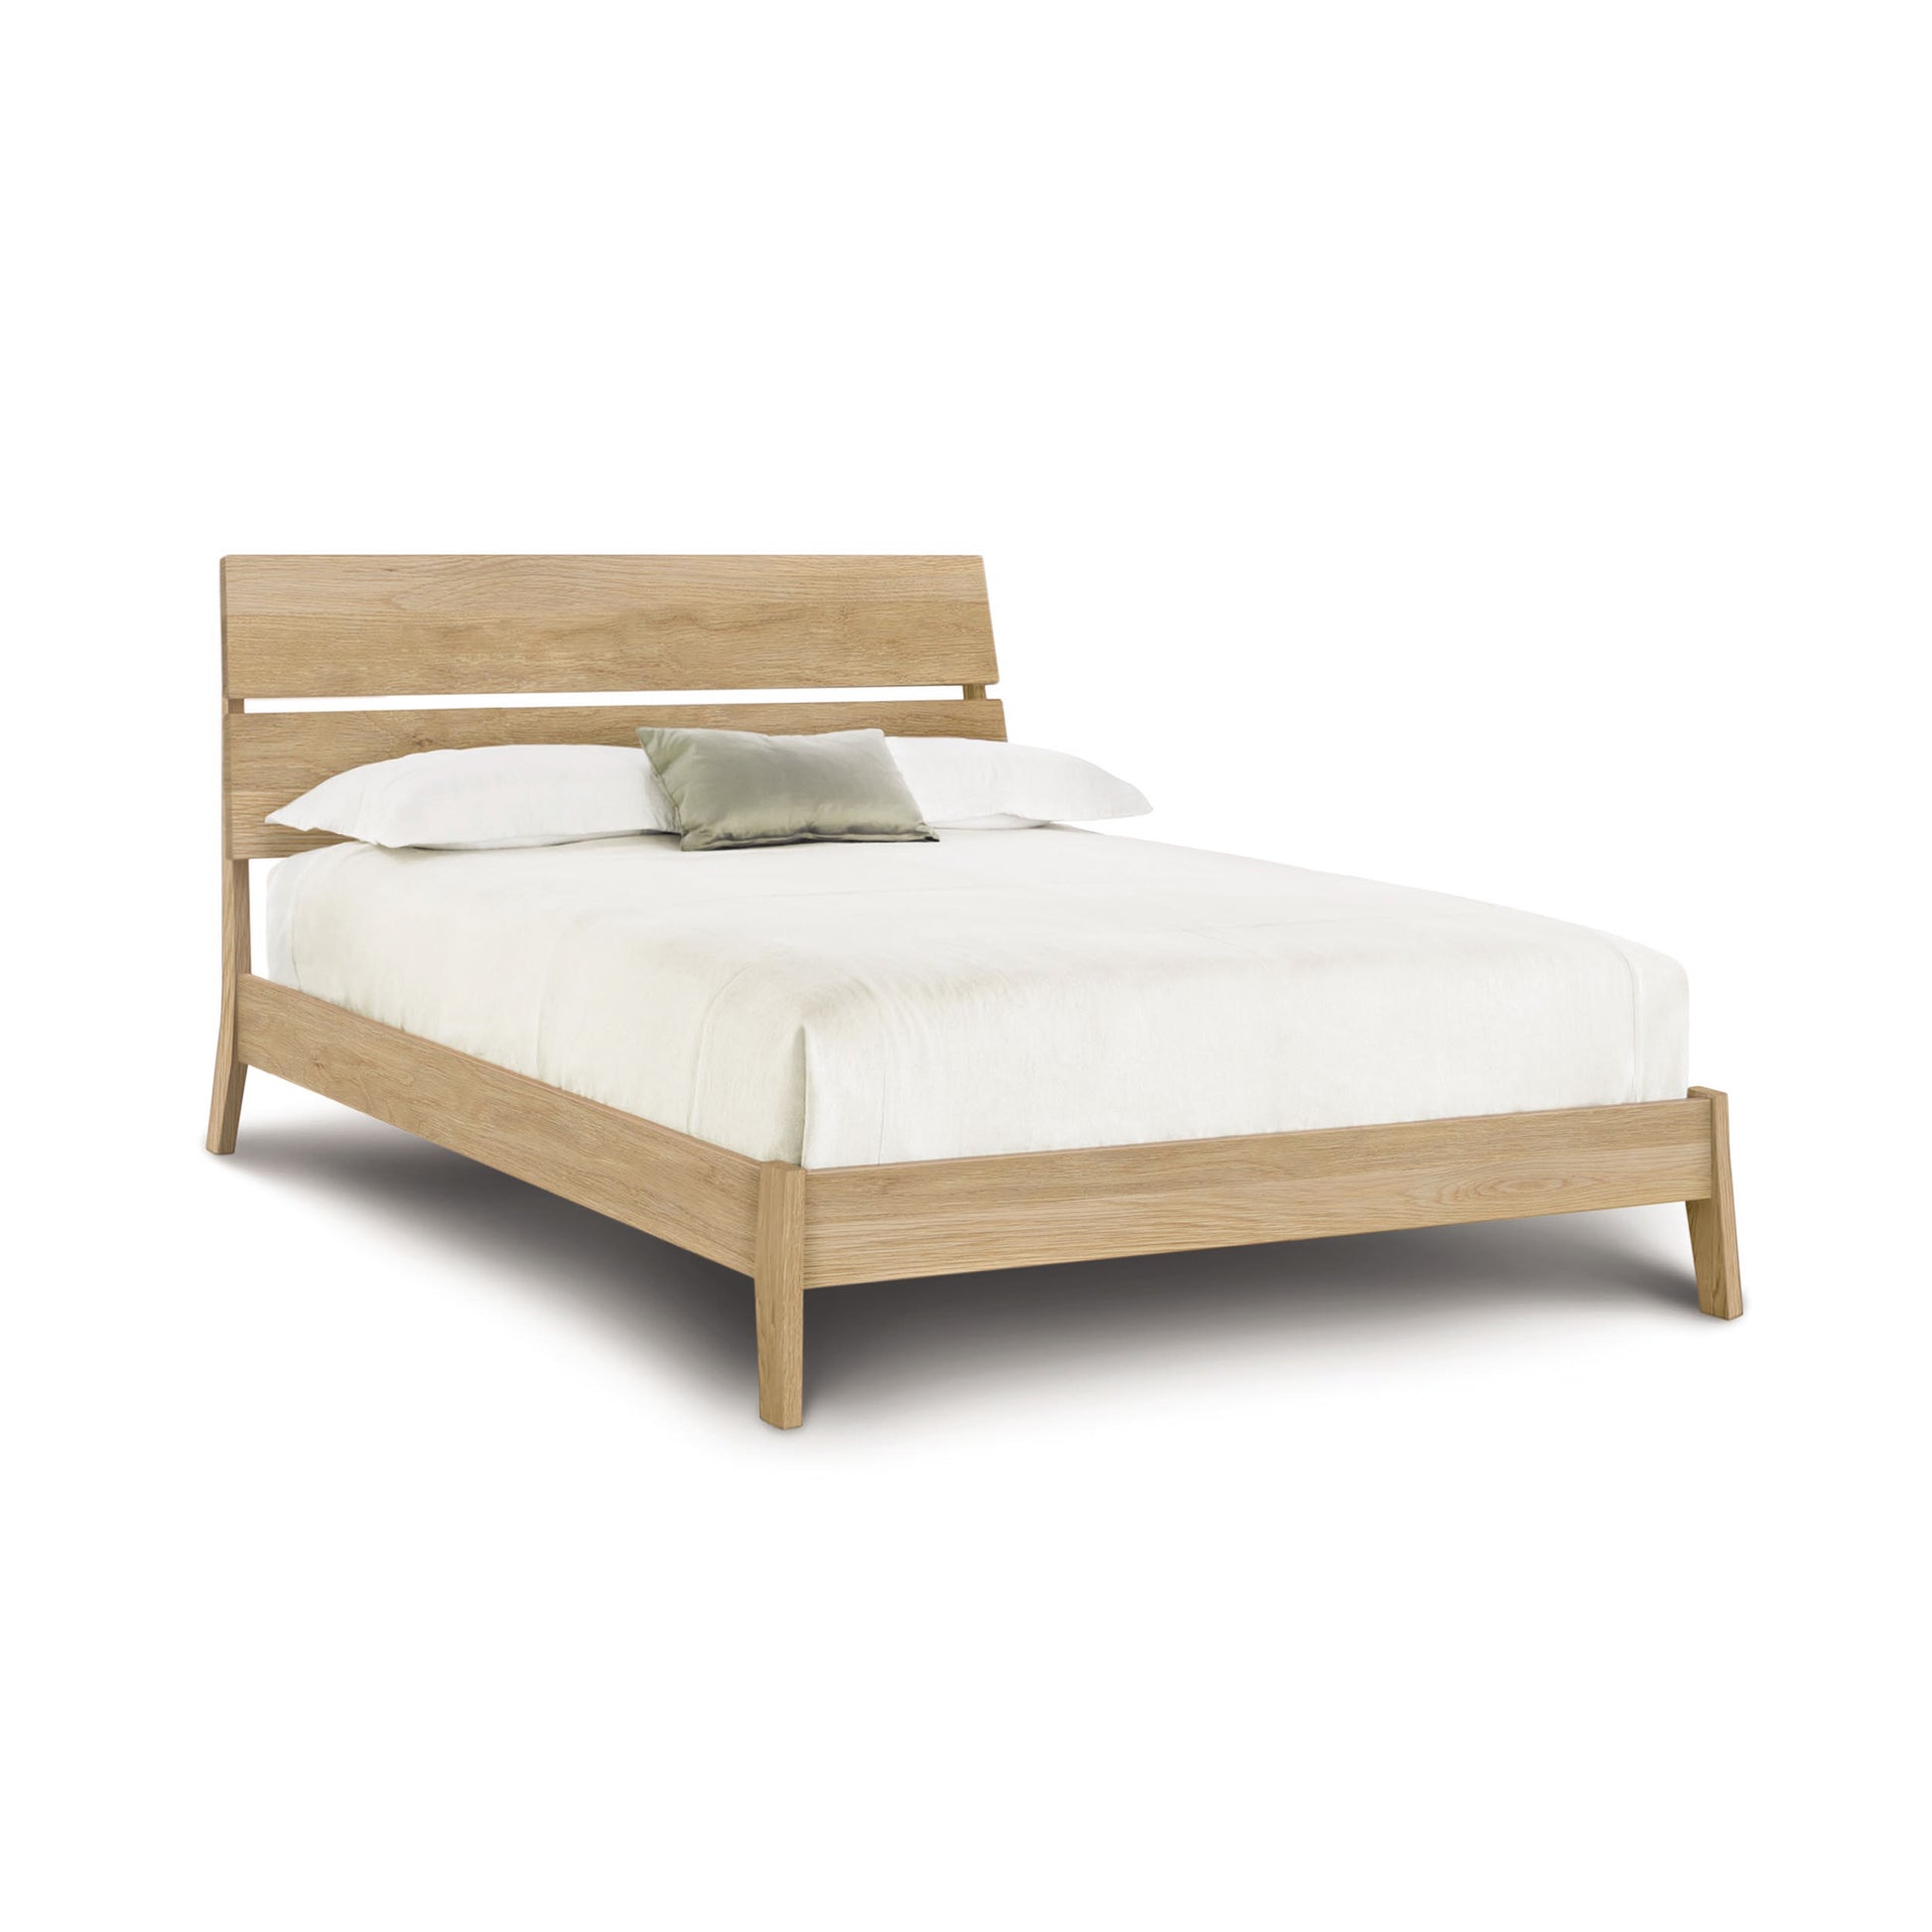 The Copeland Furniture Linn Oak Platform Bed features a sustainable wooden headboard and footboard.